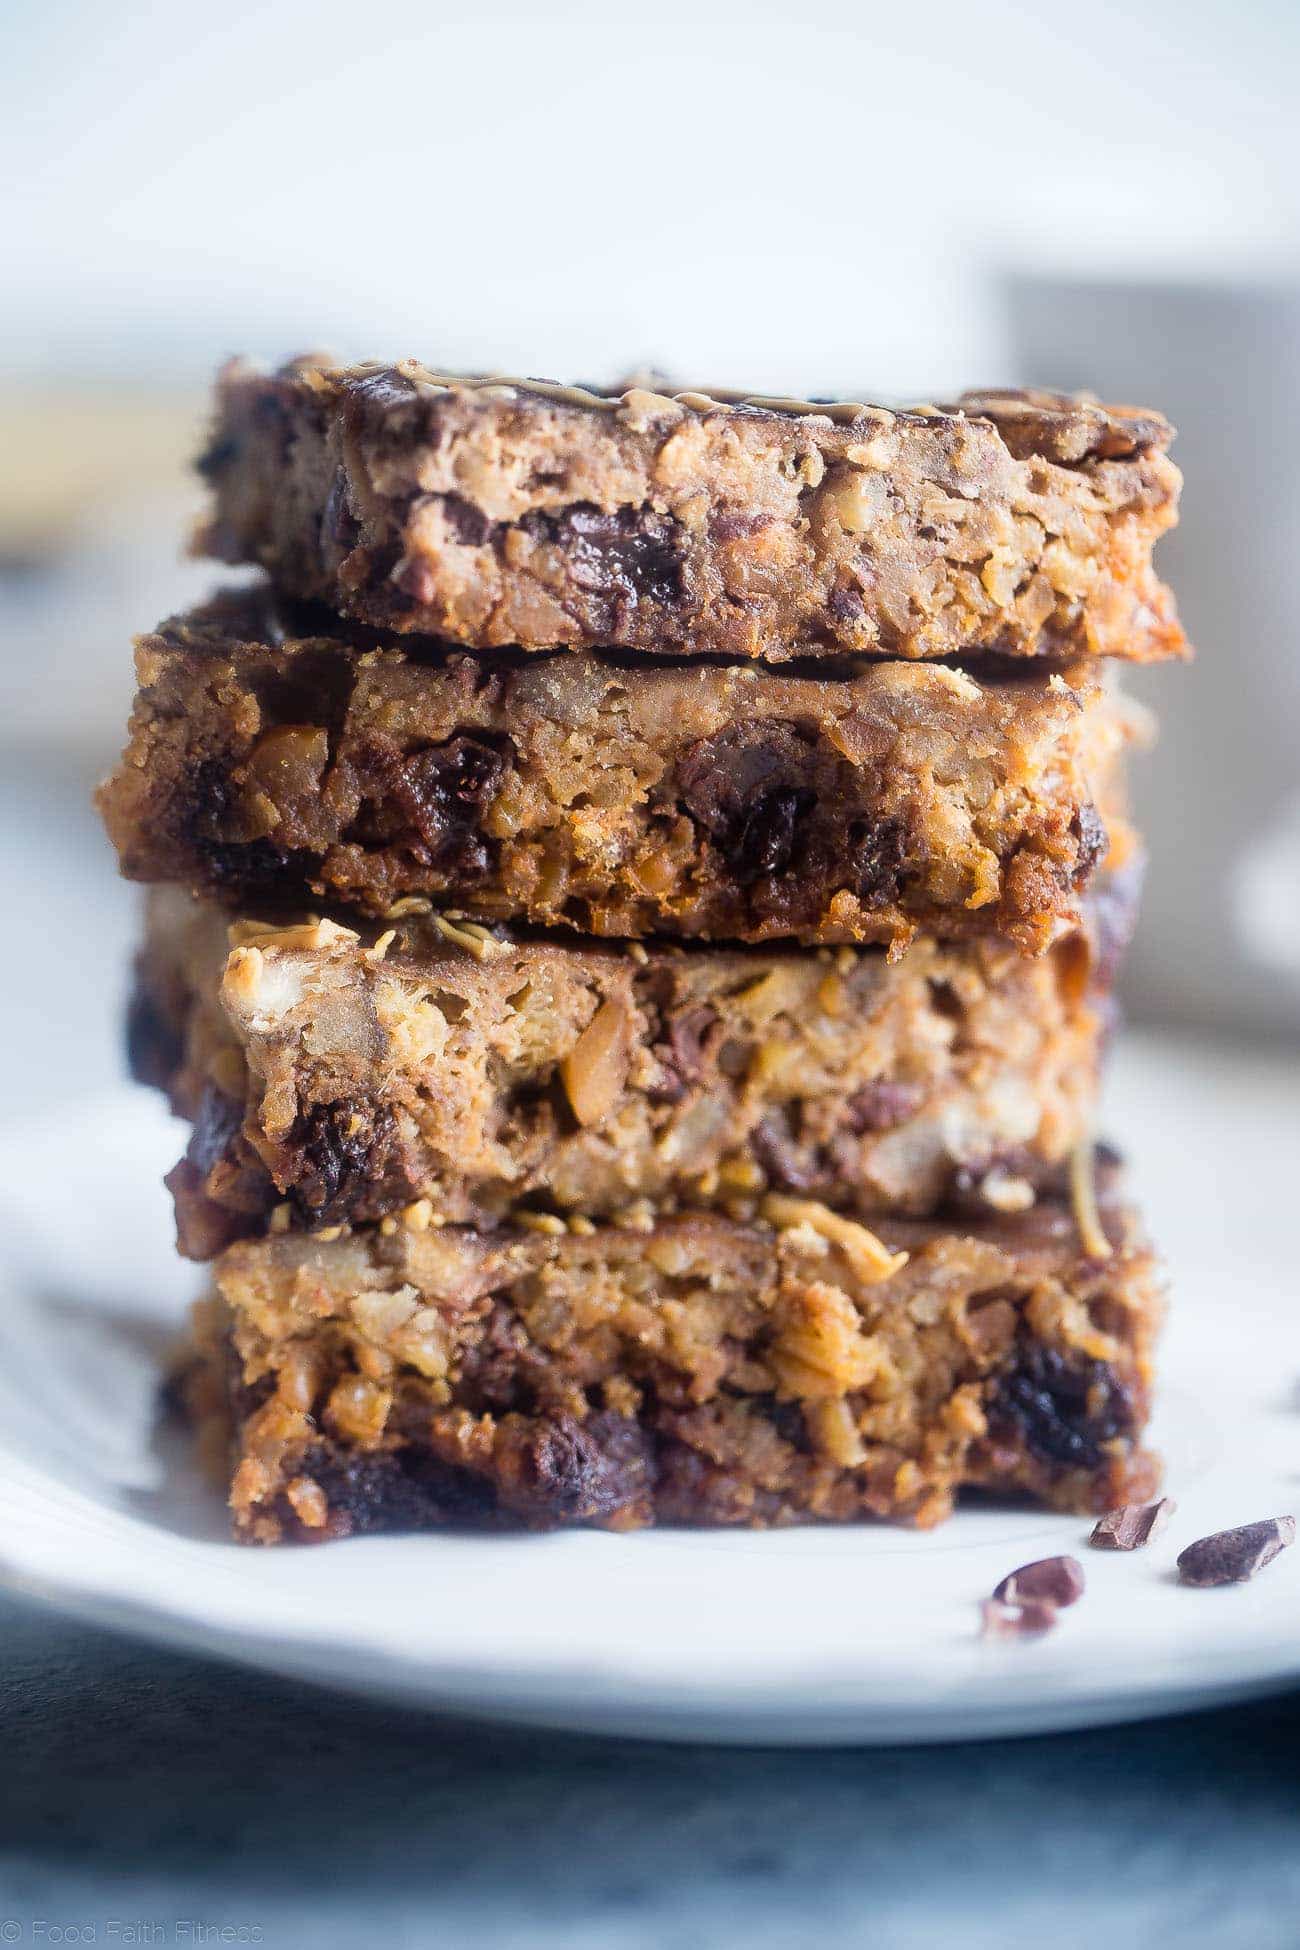 Slow Cooker Steel Cut Oats Energy Bars - These whole grain peanut butter banana energy bars are made in the slow cooker! They're an easy, healthy portable breakfast or snack! Kid friendly too! | Foodfaithfitness.com | @FoodFaithFit